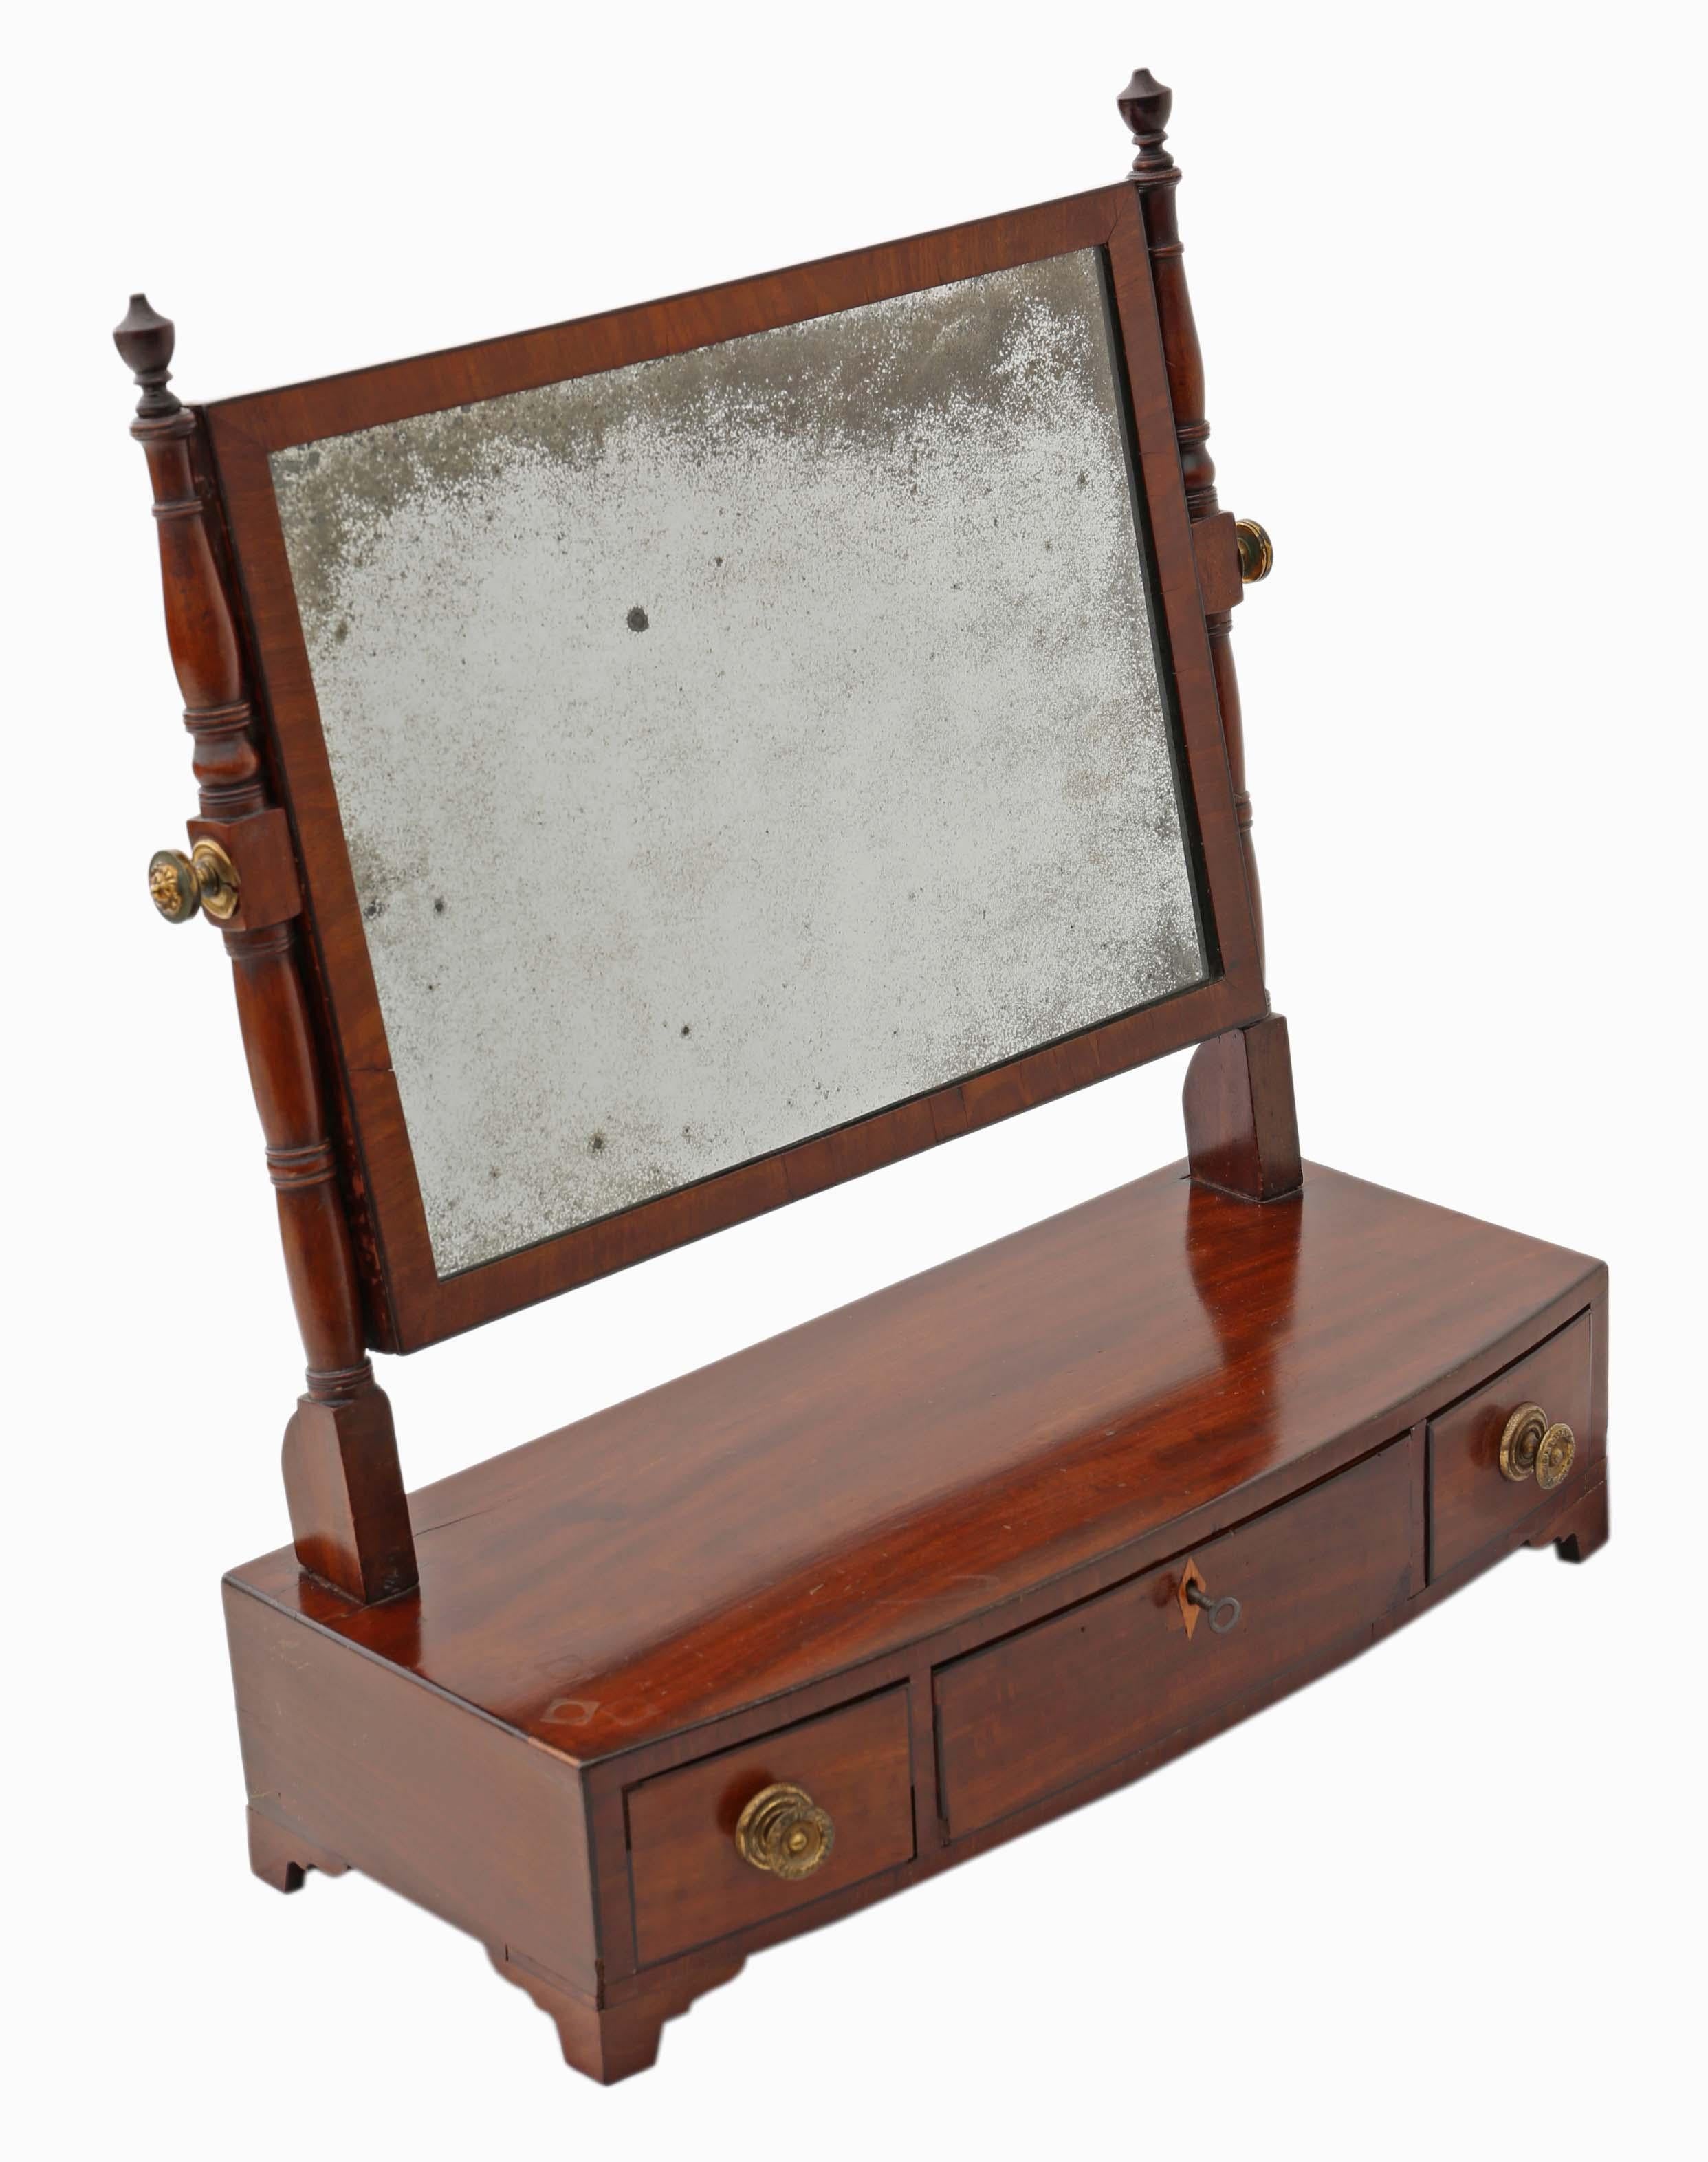 Antique circa 1810-1830 Georgian / Regency line inlaid mahogany swing dressing table or toilet mirror.
This is a lovely mirror, that is full of age and charm, with great proportions.
A rare find, that would look amazing in the right location.
The